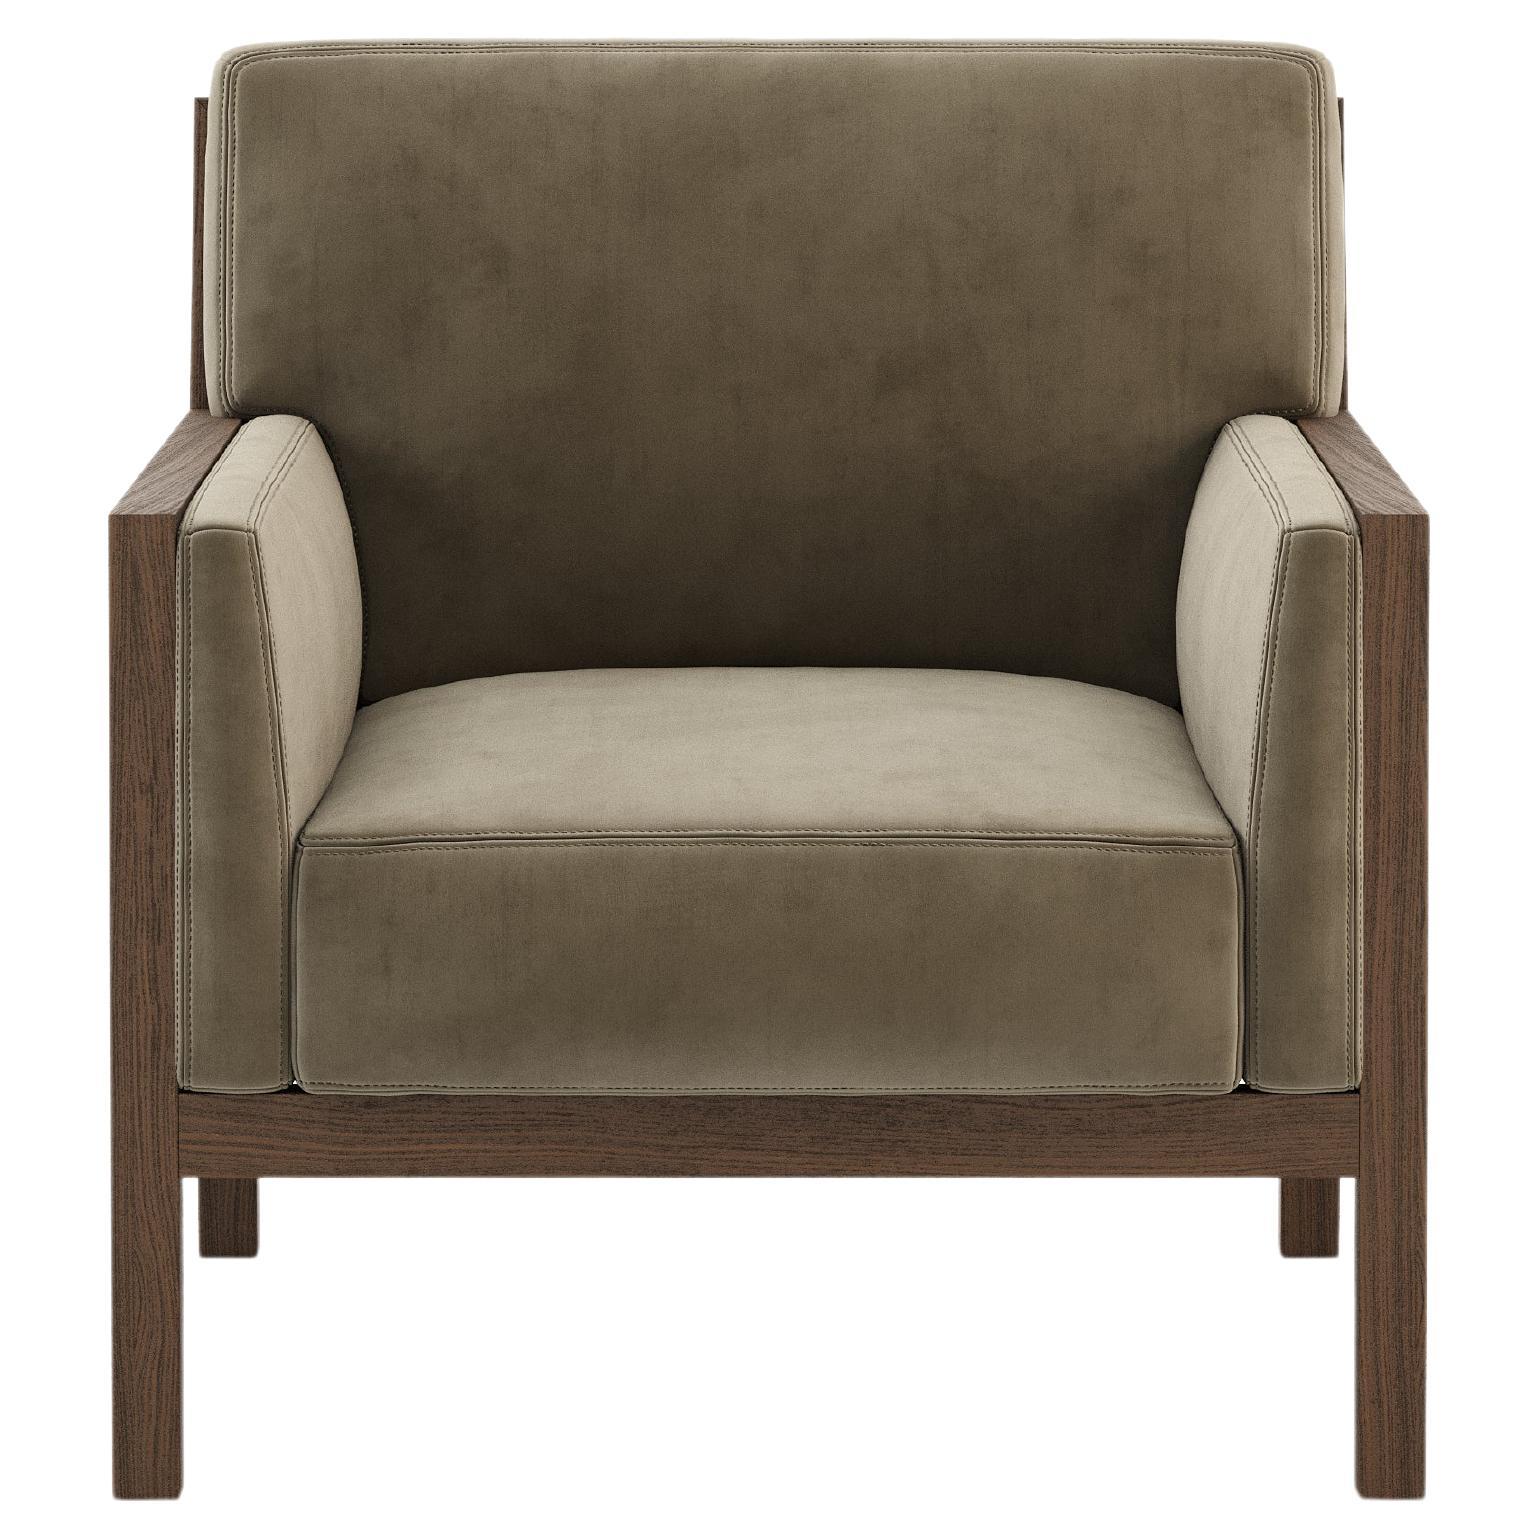 Cole Armchair, Portuguese 21st Century Contemporary Upholstered with Fabric